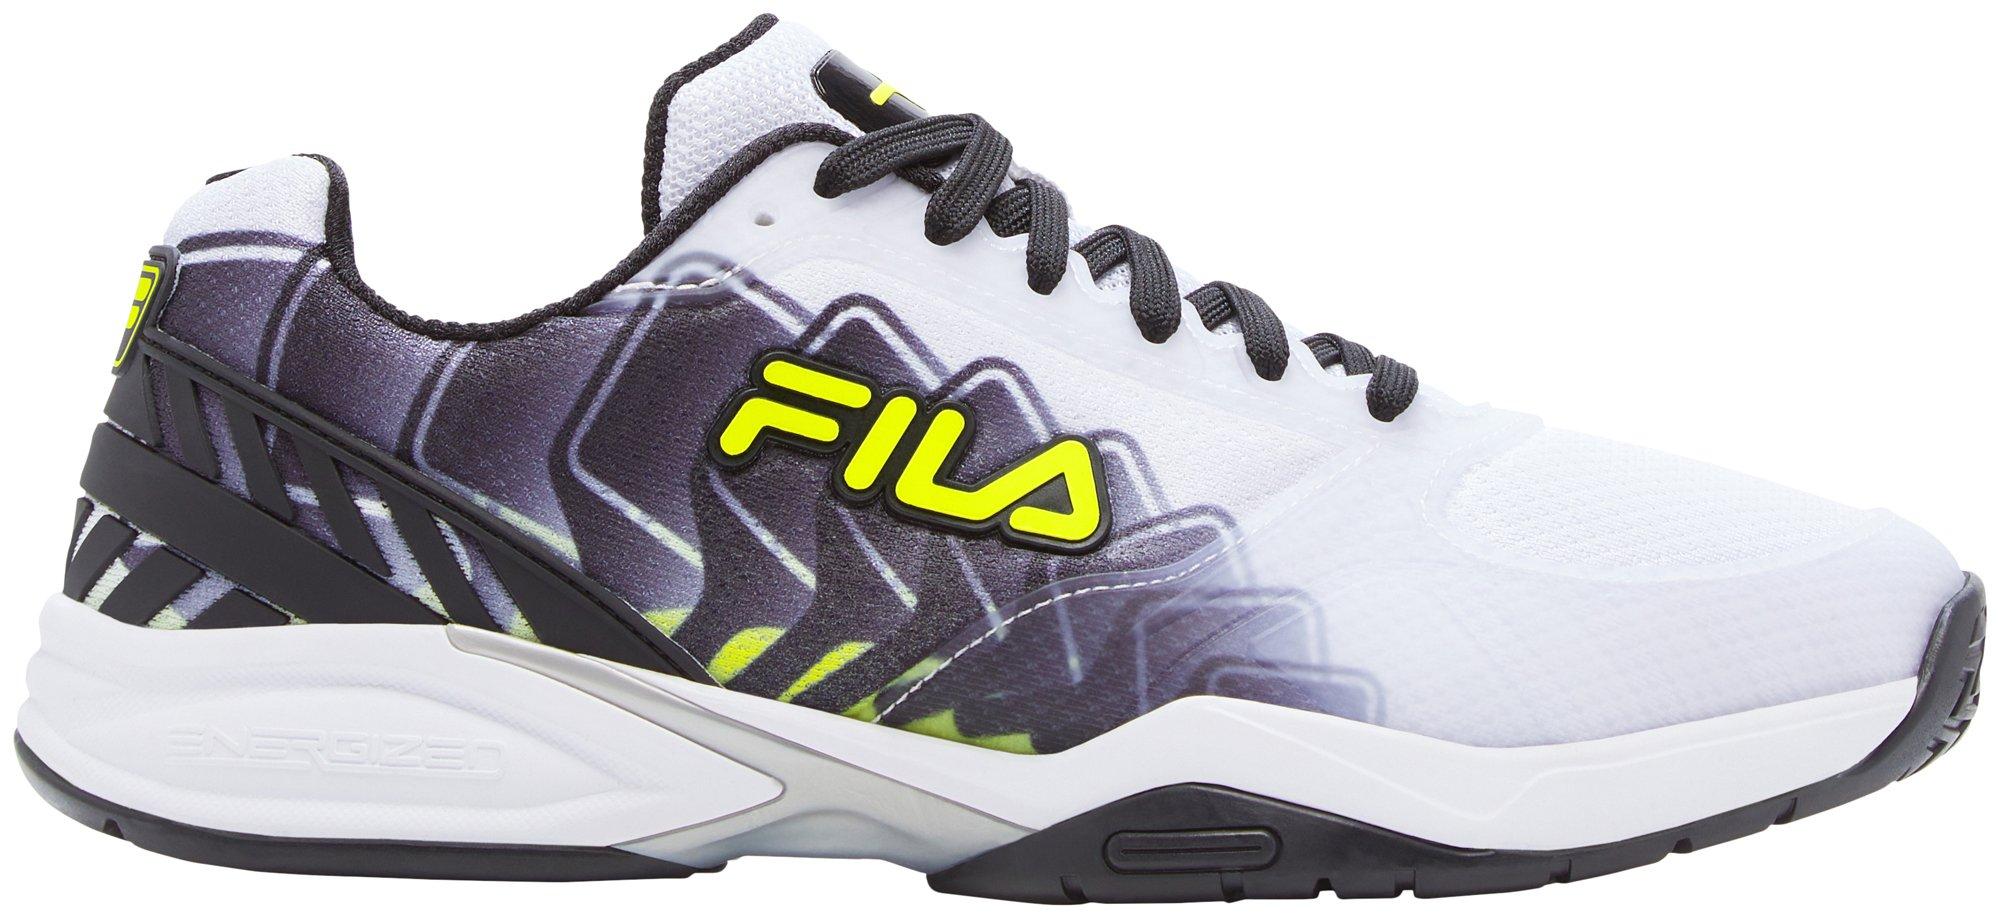 FILA and Salvin Shoes Celebrate the Hartford Whalers with Original